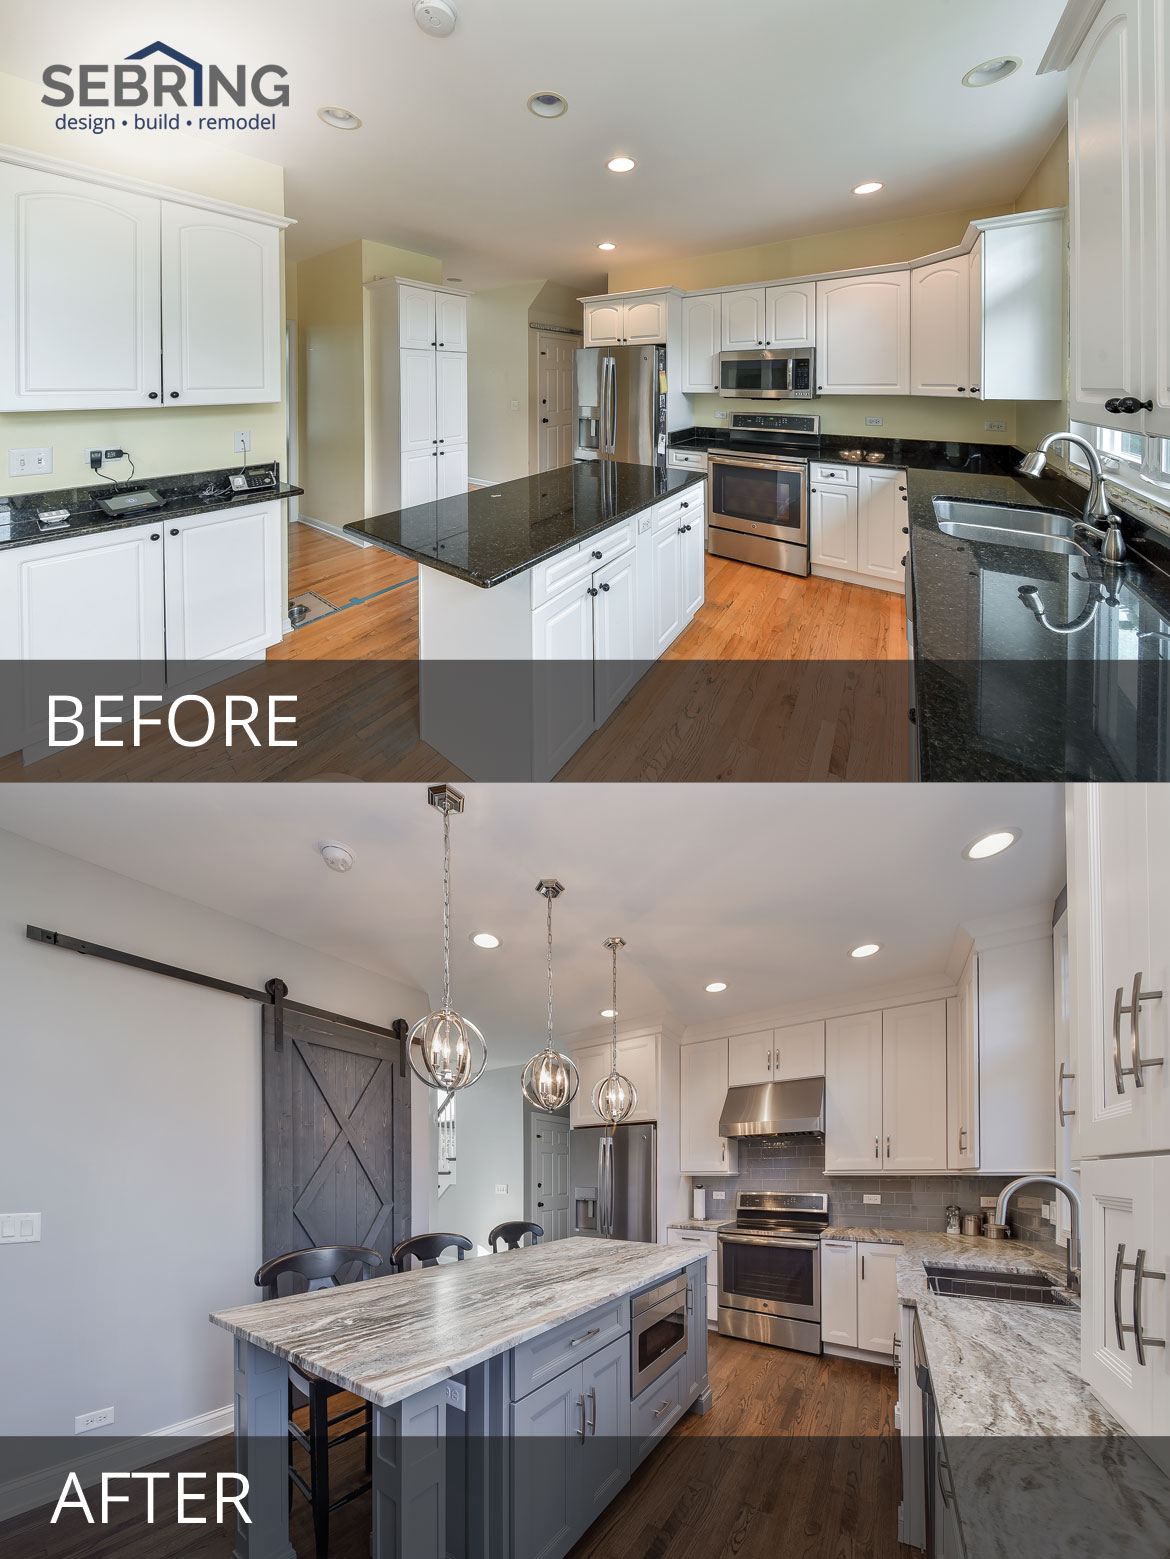 's Naperville Kitchen Remodel Pictures, Featuring White Quartz Countertops Before and After - Sebring Design Build